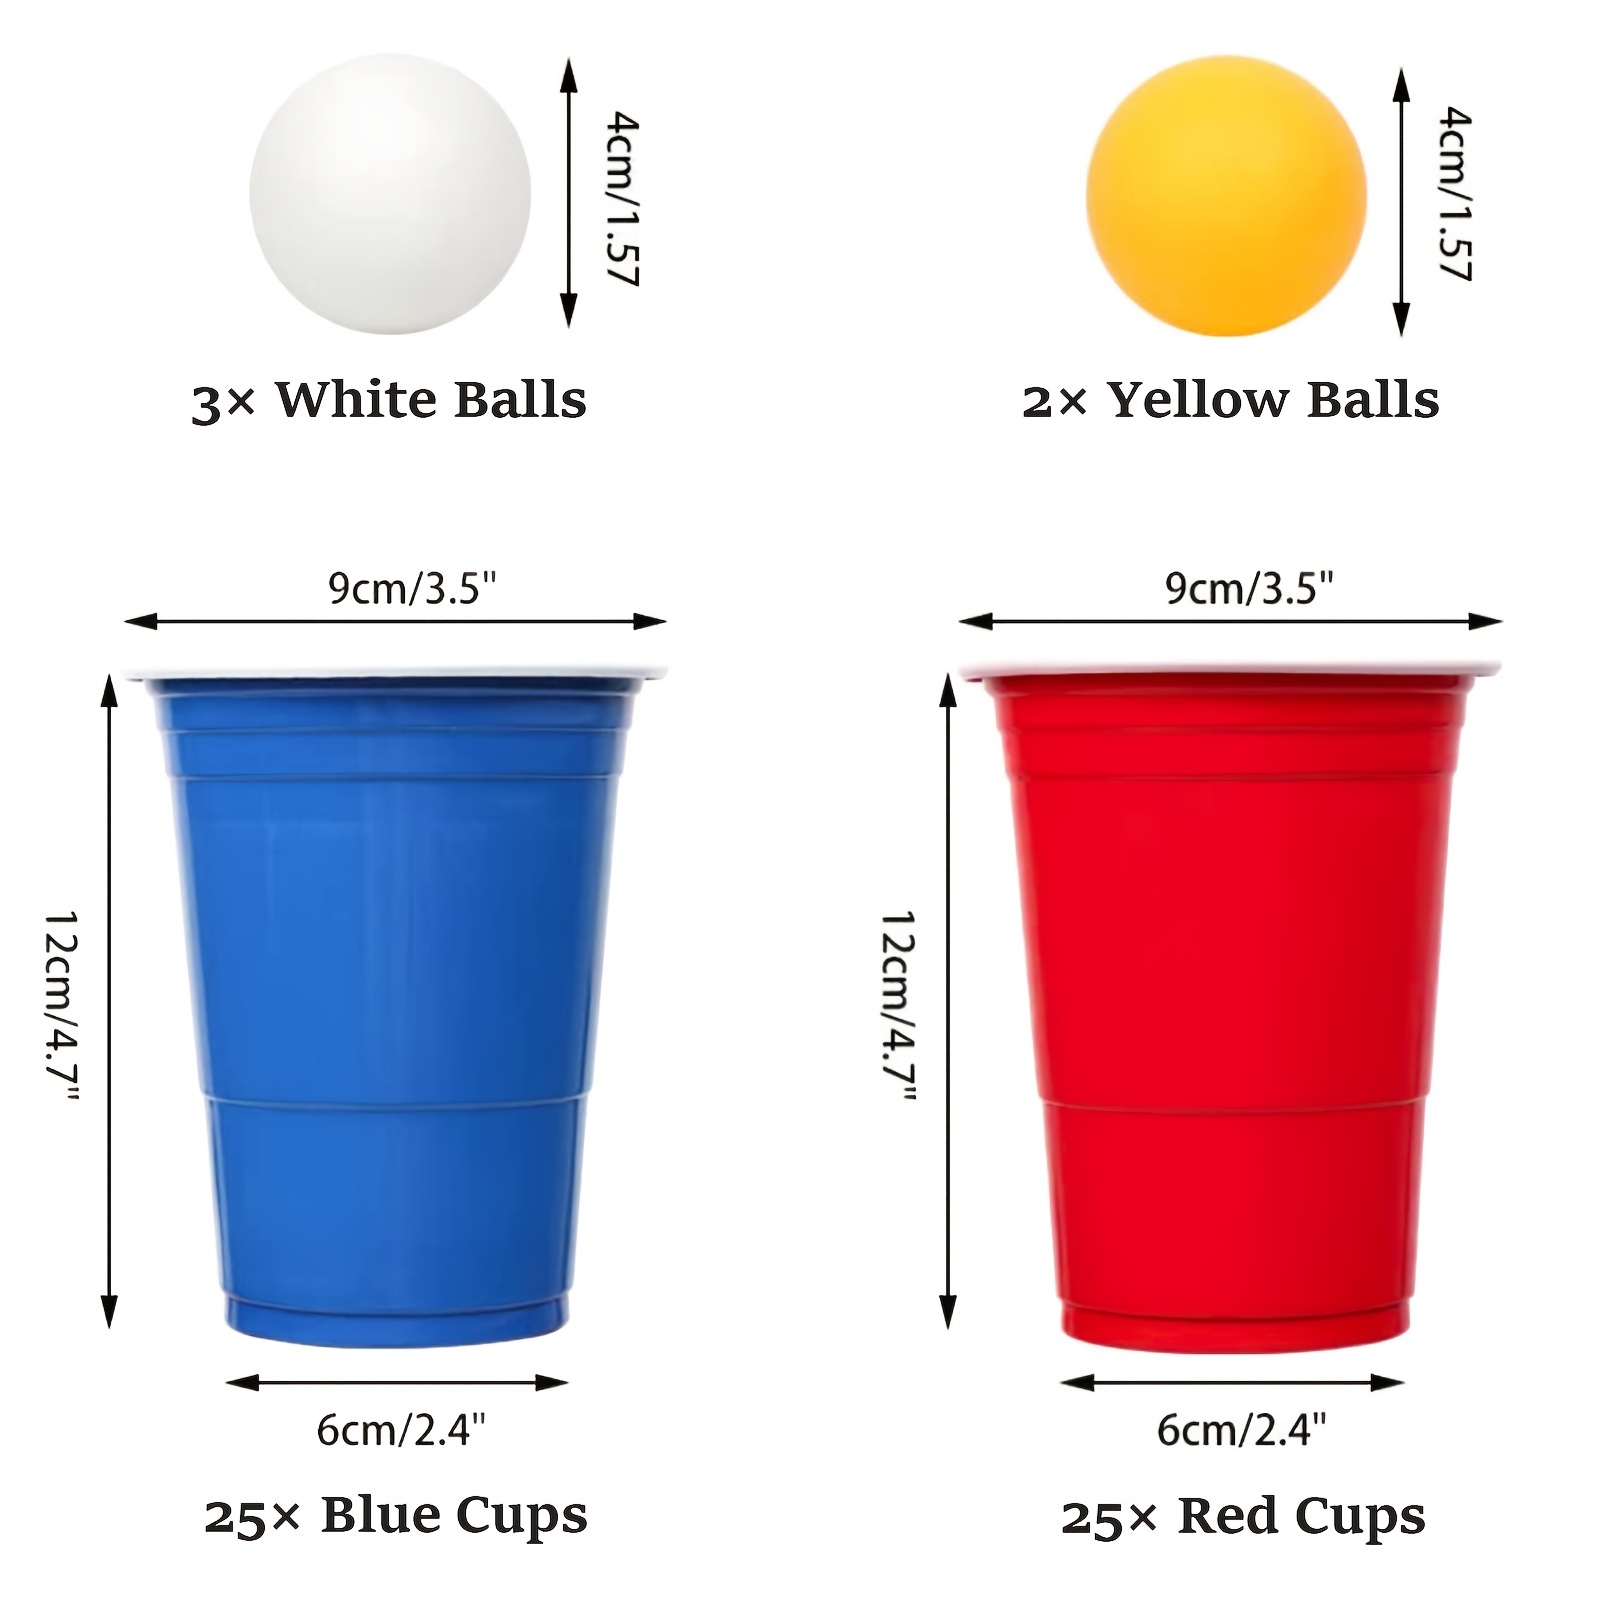 Creative Reusable Plastic Beer Pong Cups -,, - Black, Red, Blue